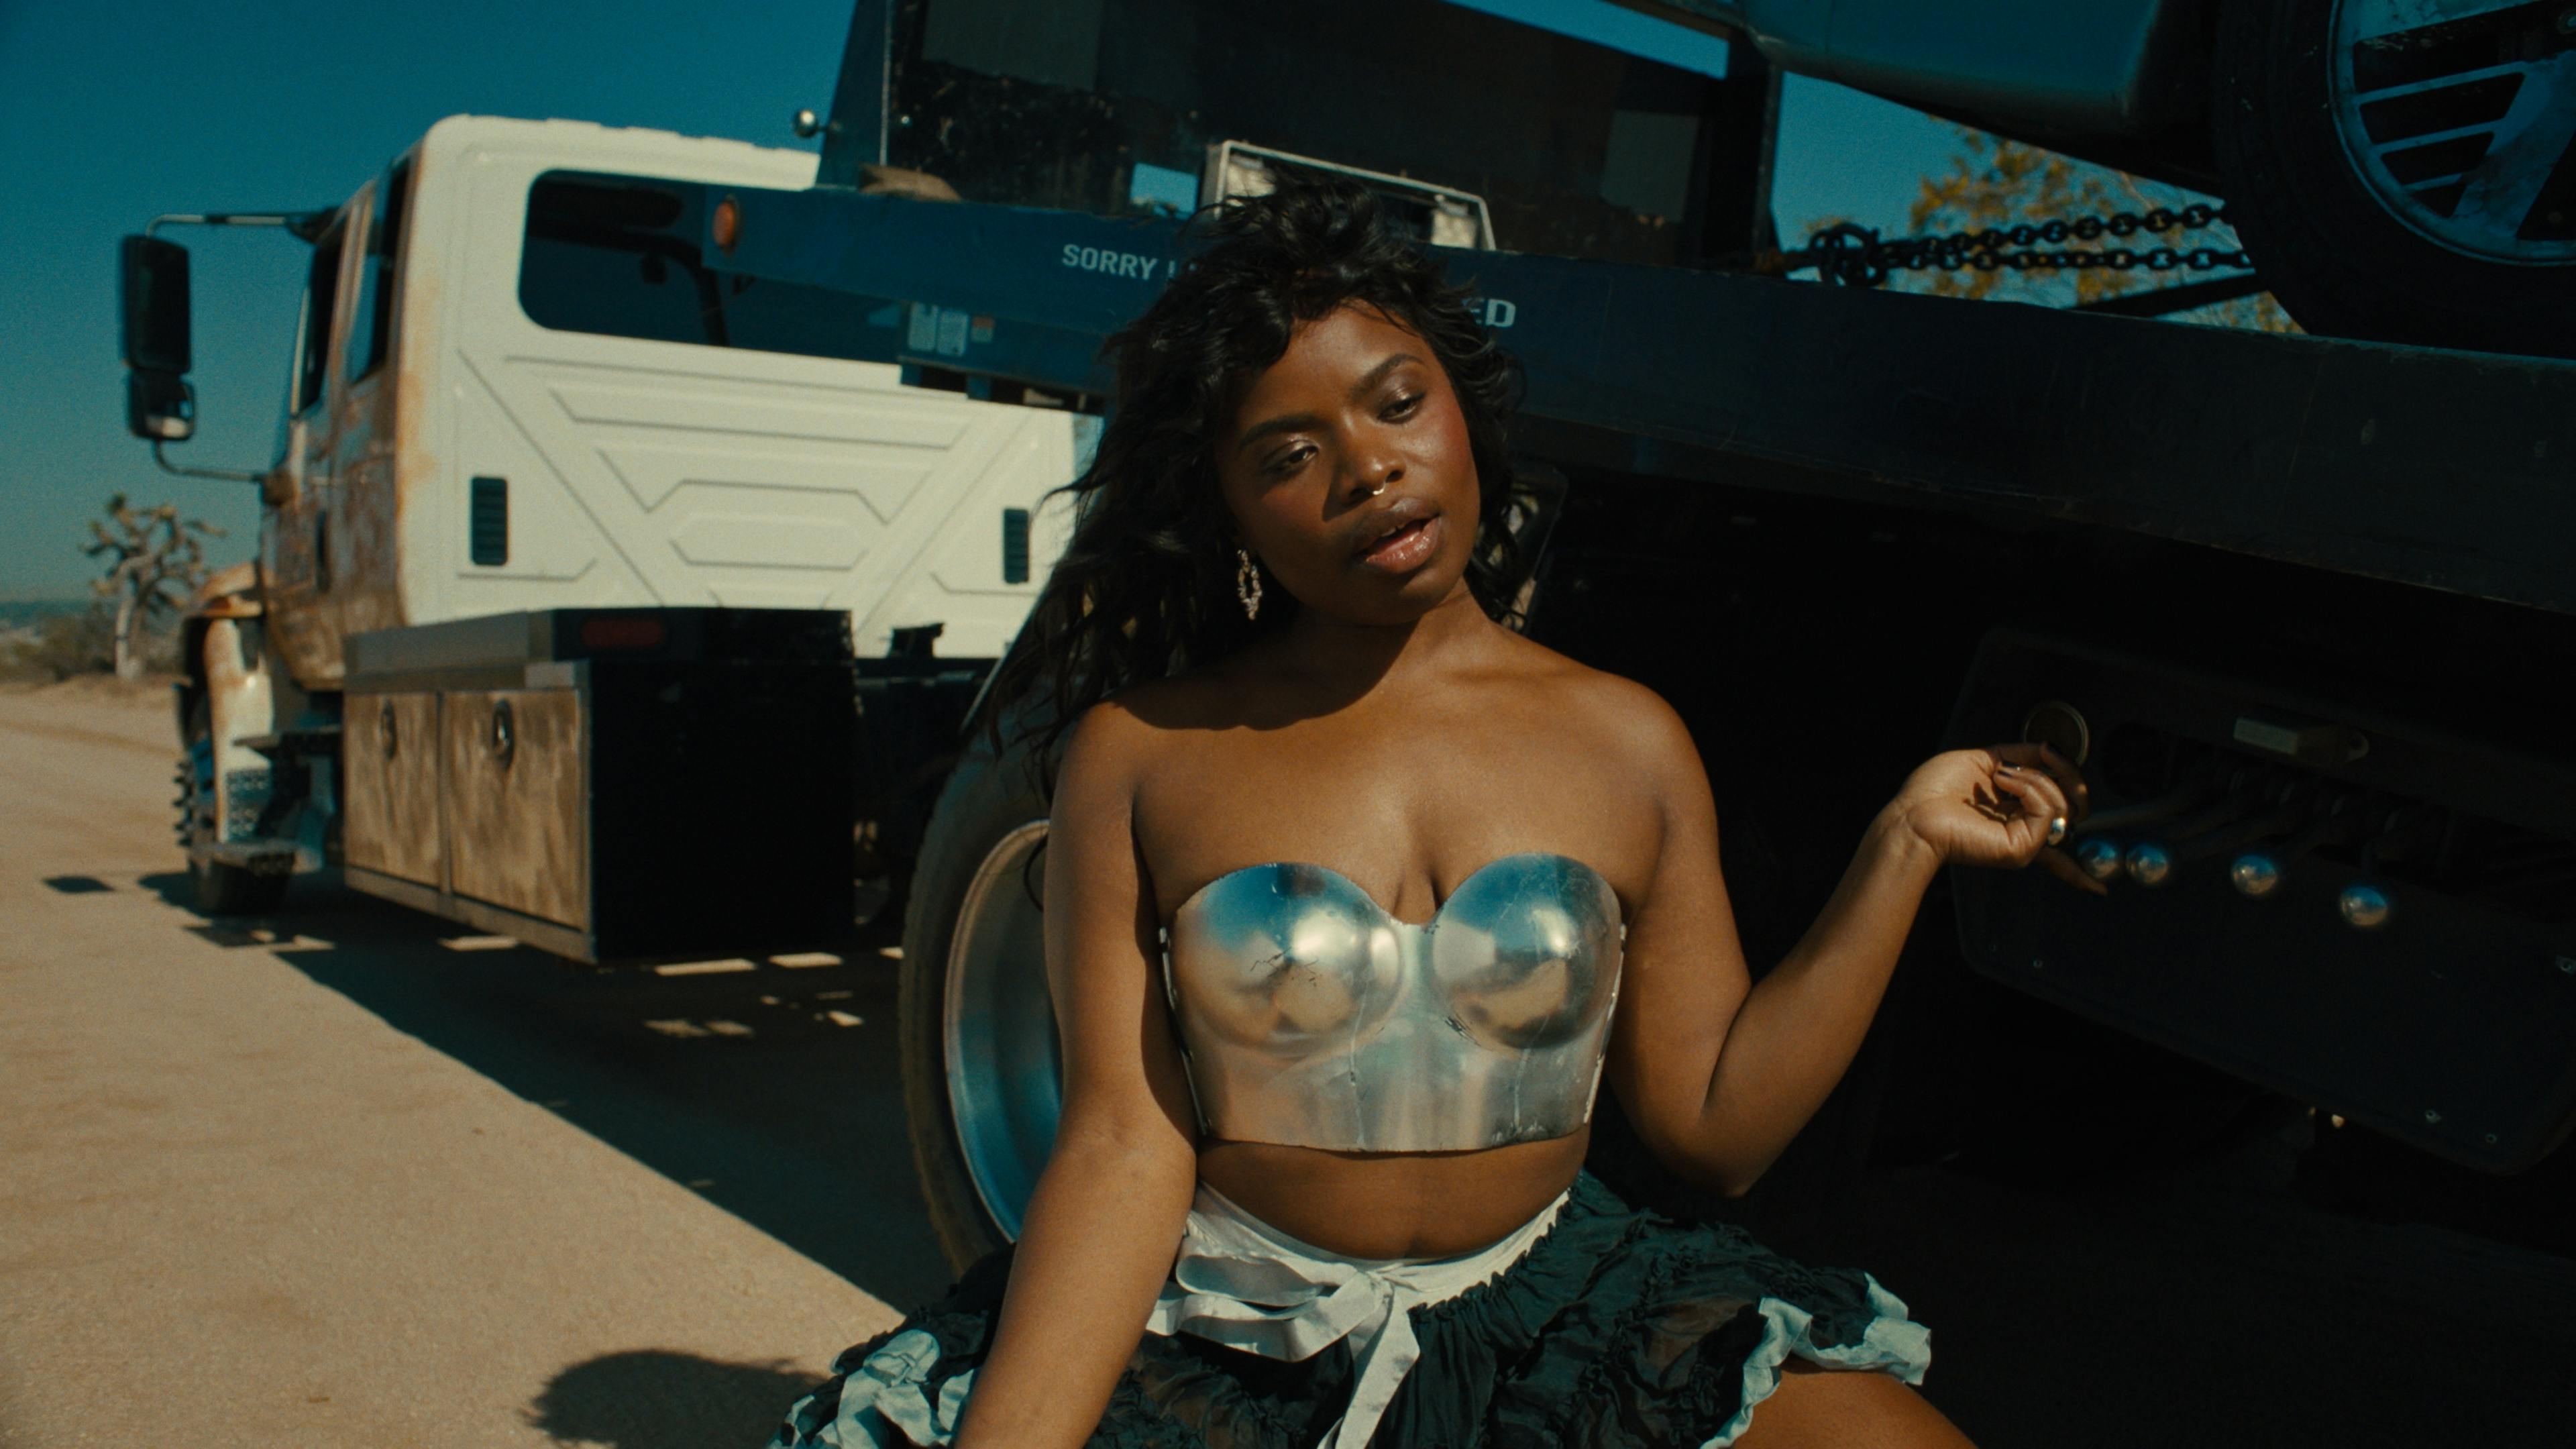 Vagabon sits in front of a large truck. She's wearing a metallic silver bralette and a ruffled black skirt, with a natural makeup look and her hair styled in loose waves. The setting is outdoors on a sunny day, with clear skies and a dry landscape in the background.